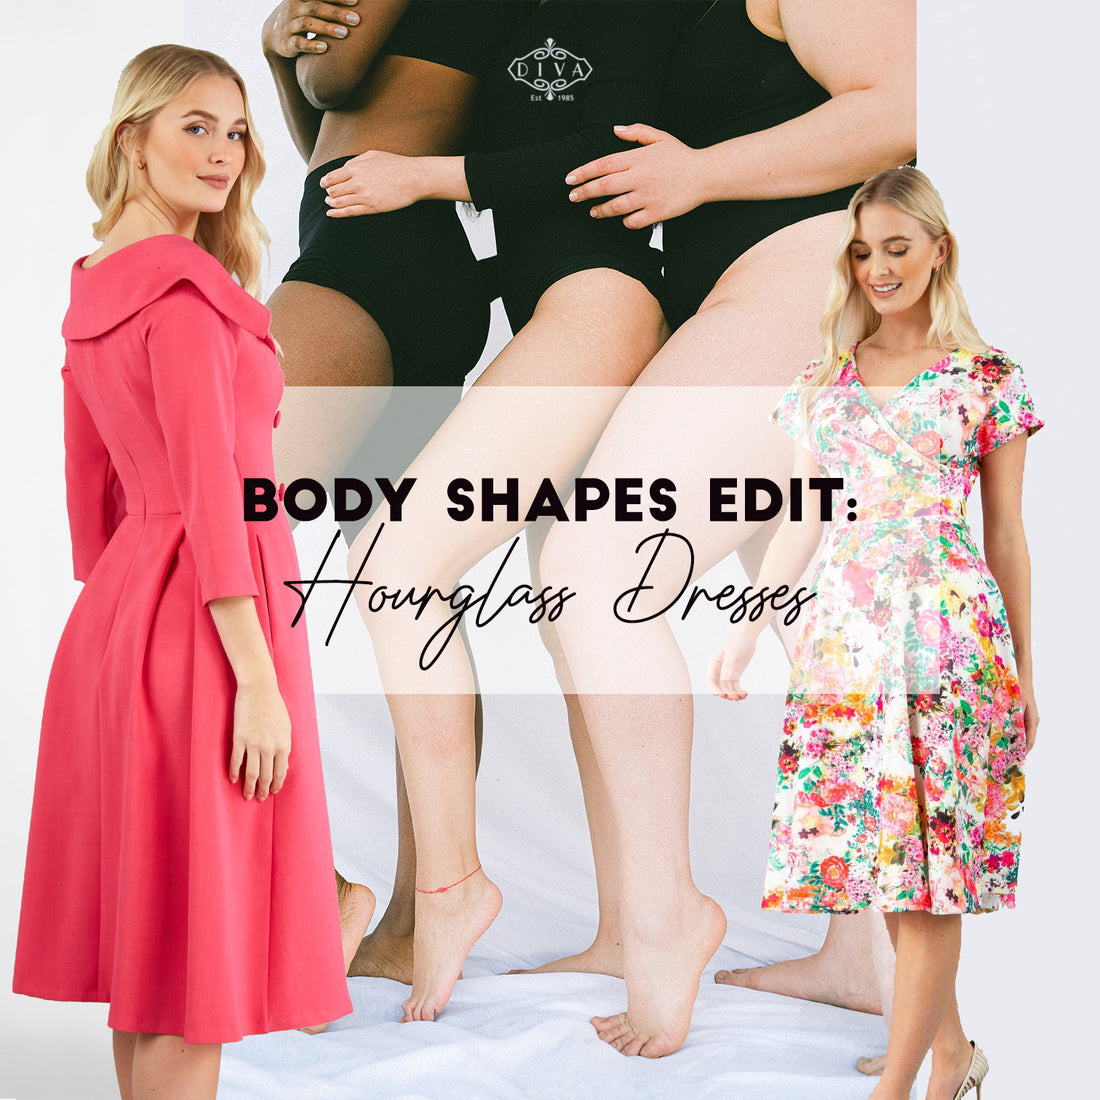 How to dress with an hourglass figure or hourglass body shape